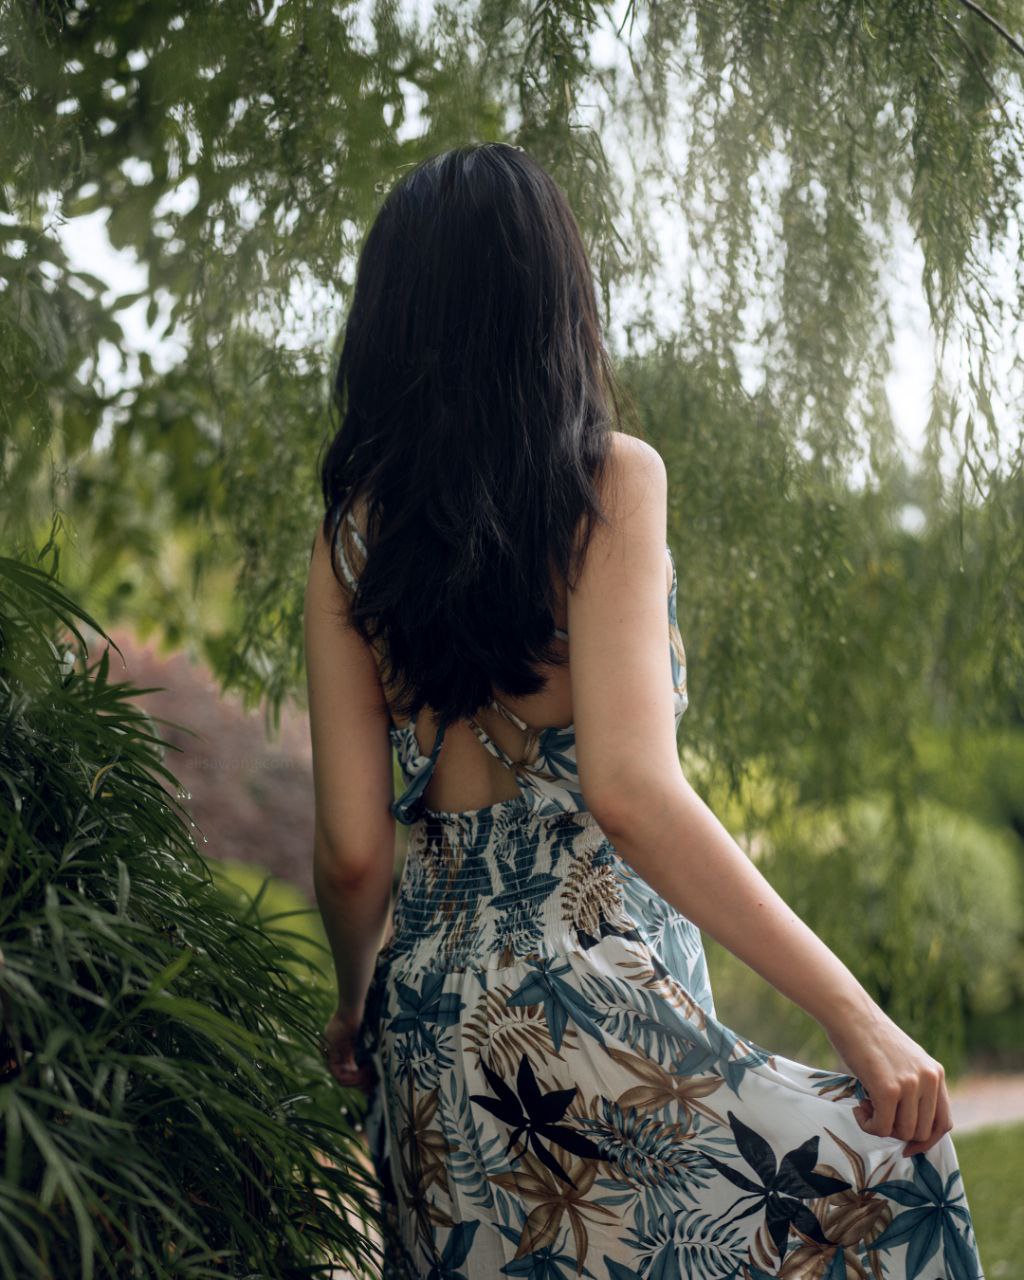 Back view of girl wearing a summer dress in a garden full of green plants